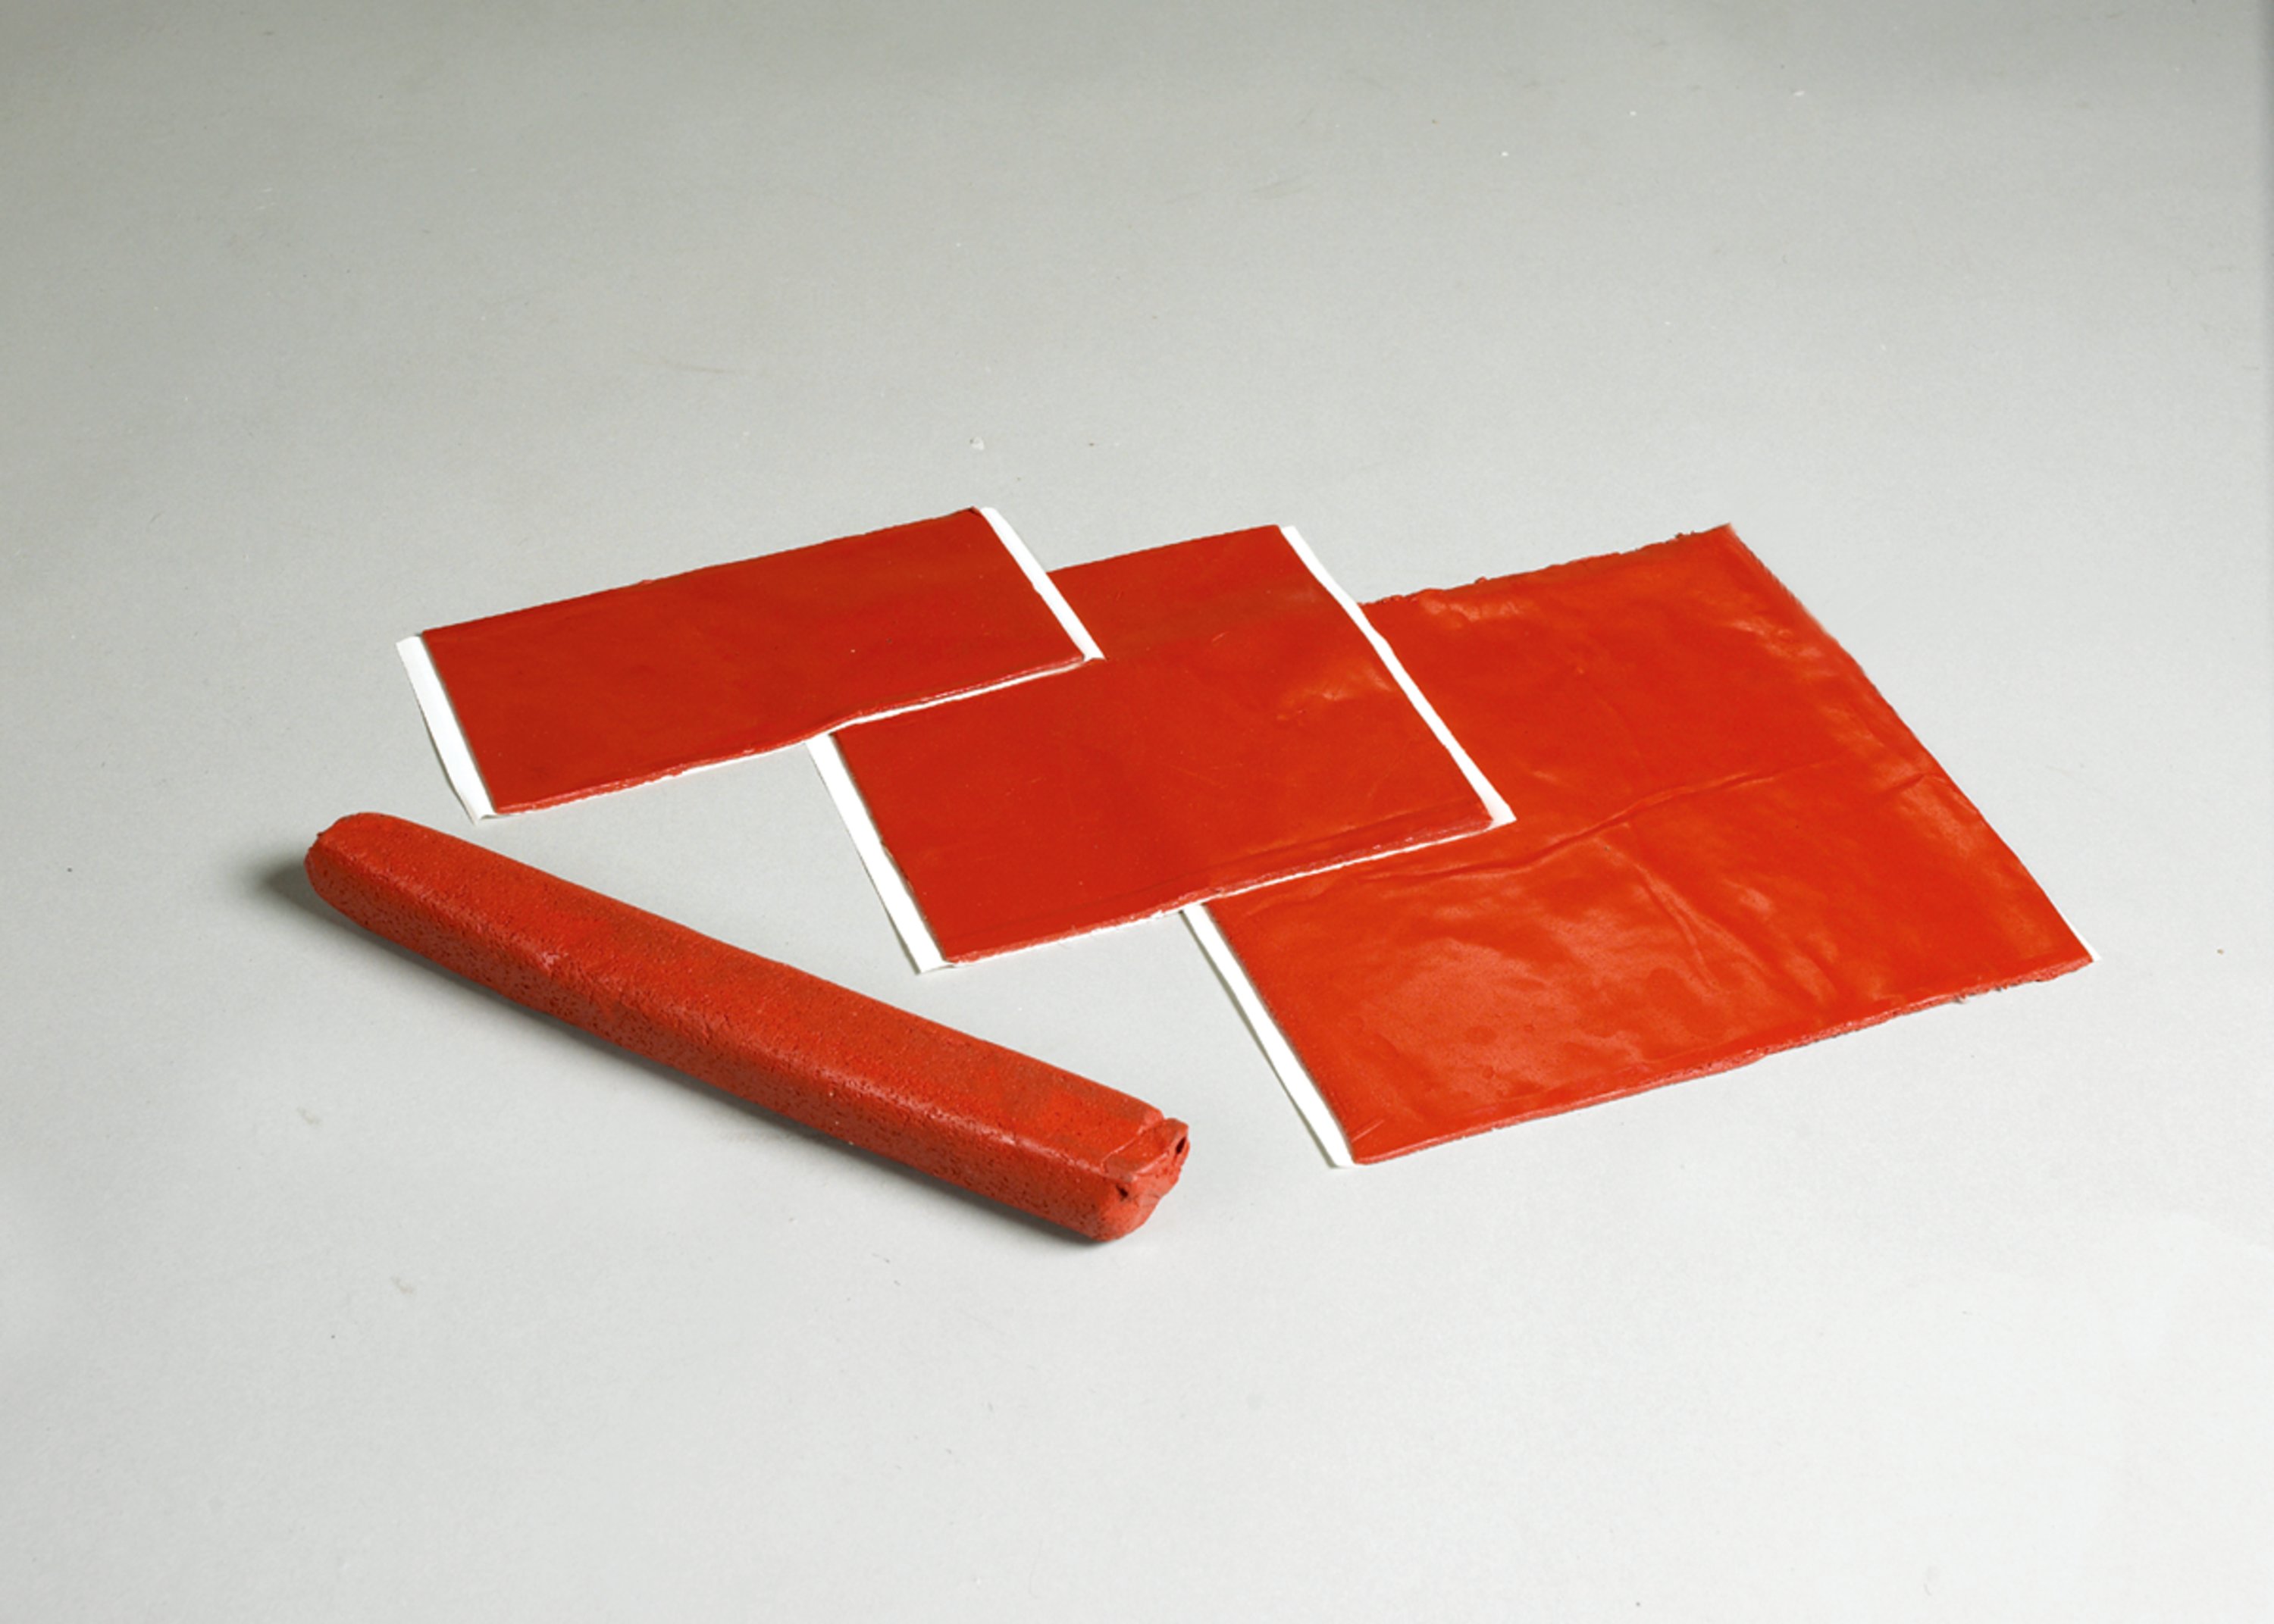  For applications requiring conformable coverage, these pliable 3M™ Fire Barrier Moldable Putty Pads MPP+ meet a full range of firestop needs that would be impractical with strips, wraps or rolls.